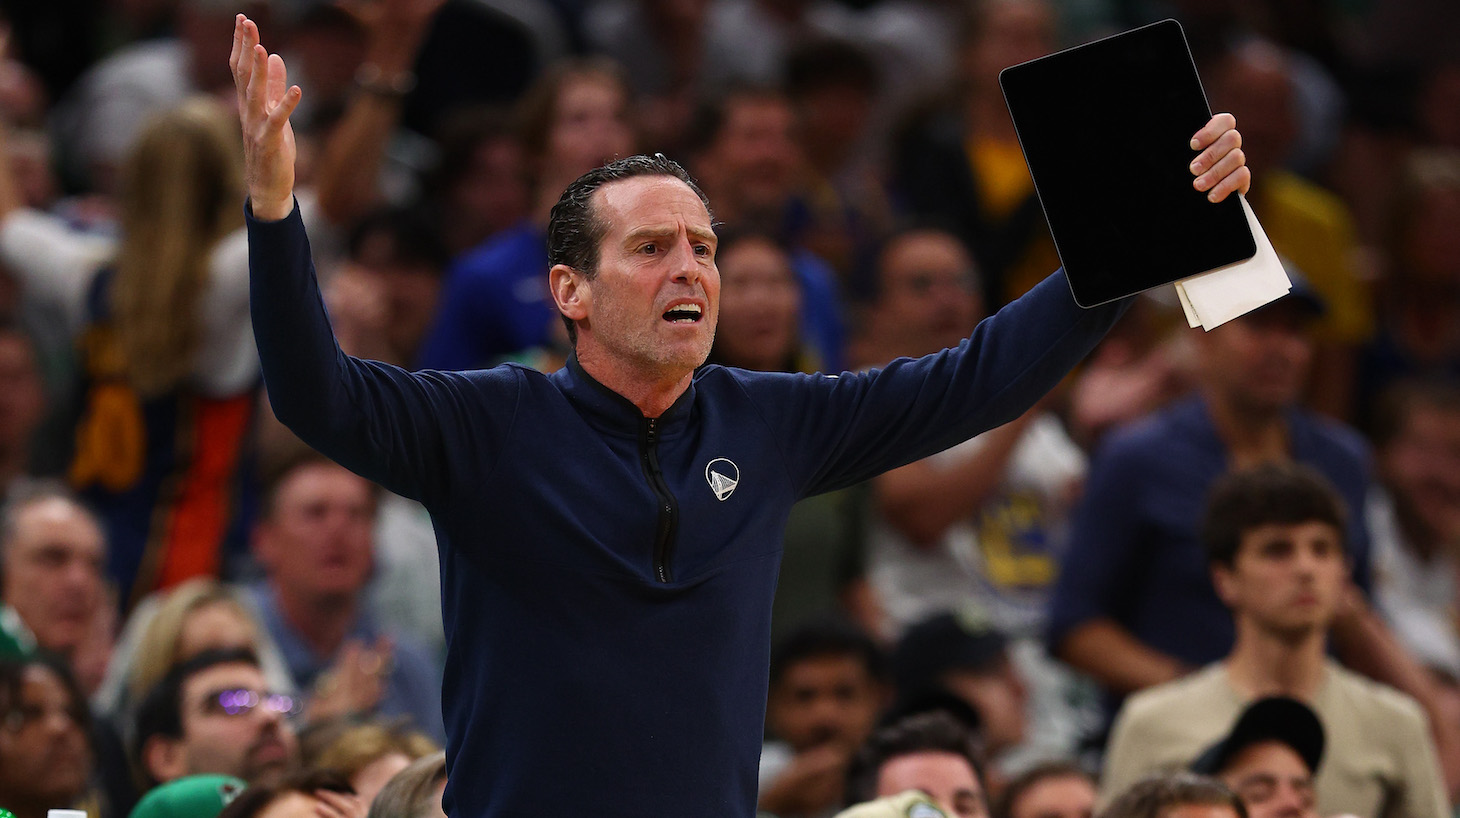 Assistant coach Kenny Atkinson reacts to a play in the third quarter against the Boston Celtics during Game Four of the 2022 NBA Finals at TD Garden on June 10, 2022 in Boston, Massachusetts.